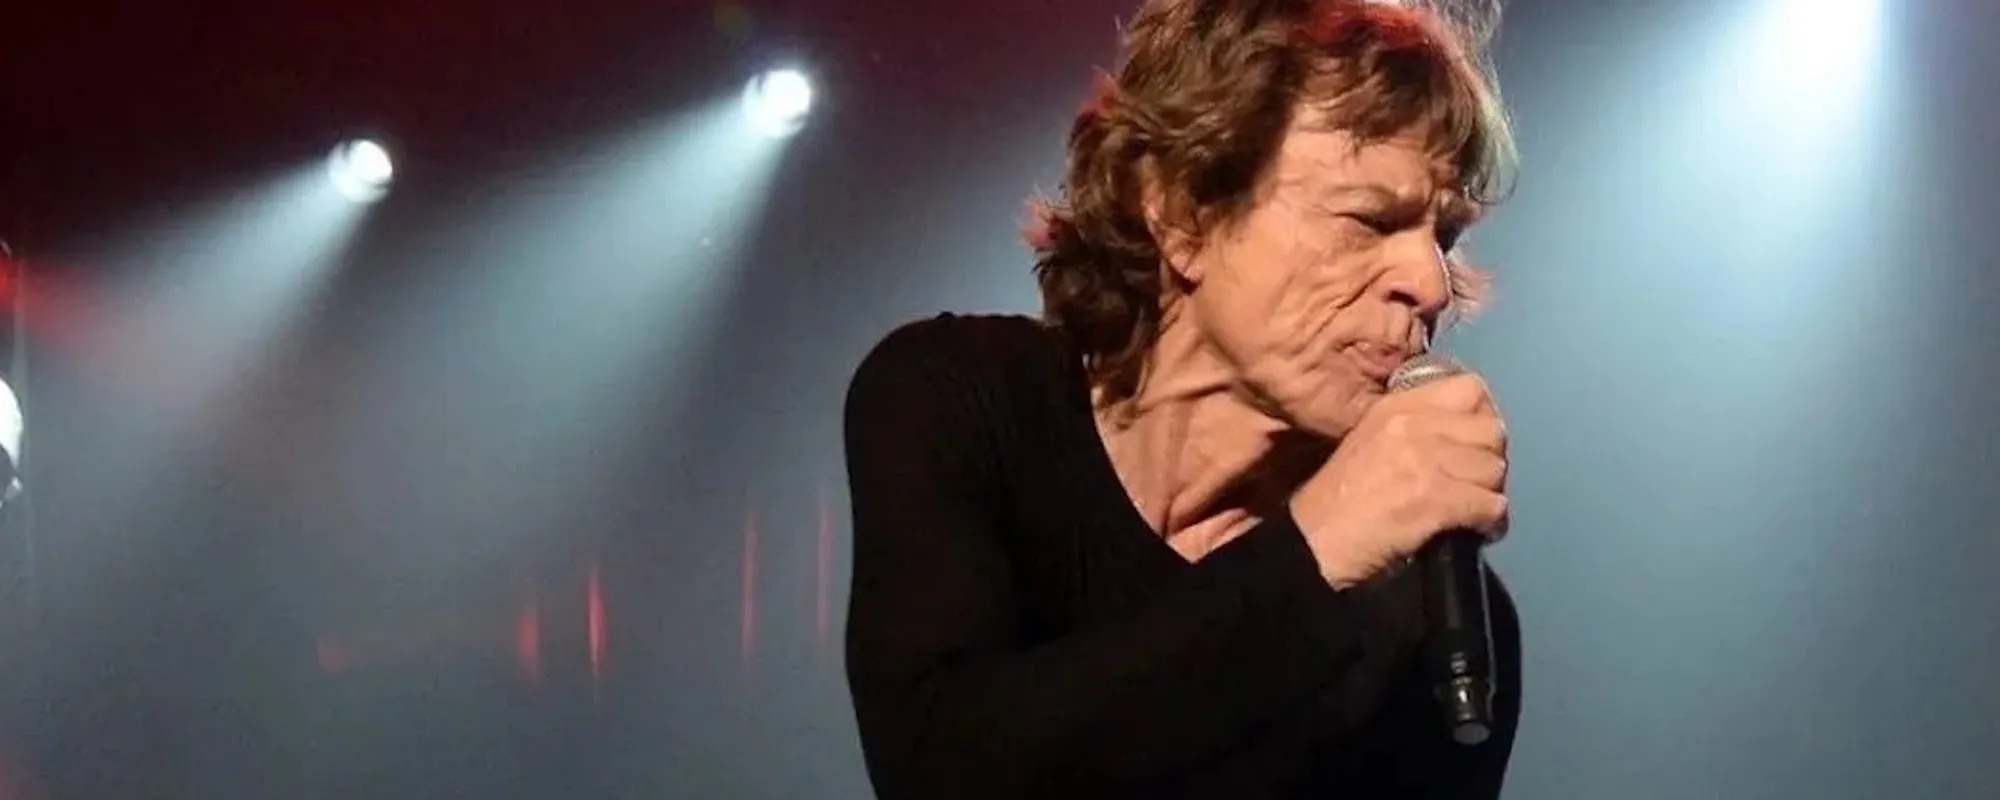 The Rolling Stones Postpone Amsterdam Show Last Minute After Mick Jagger Tests Positive for COVID